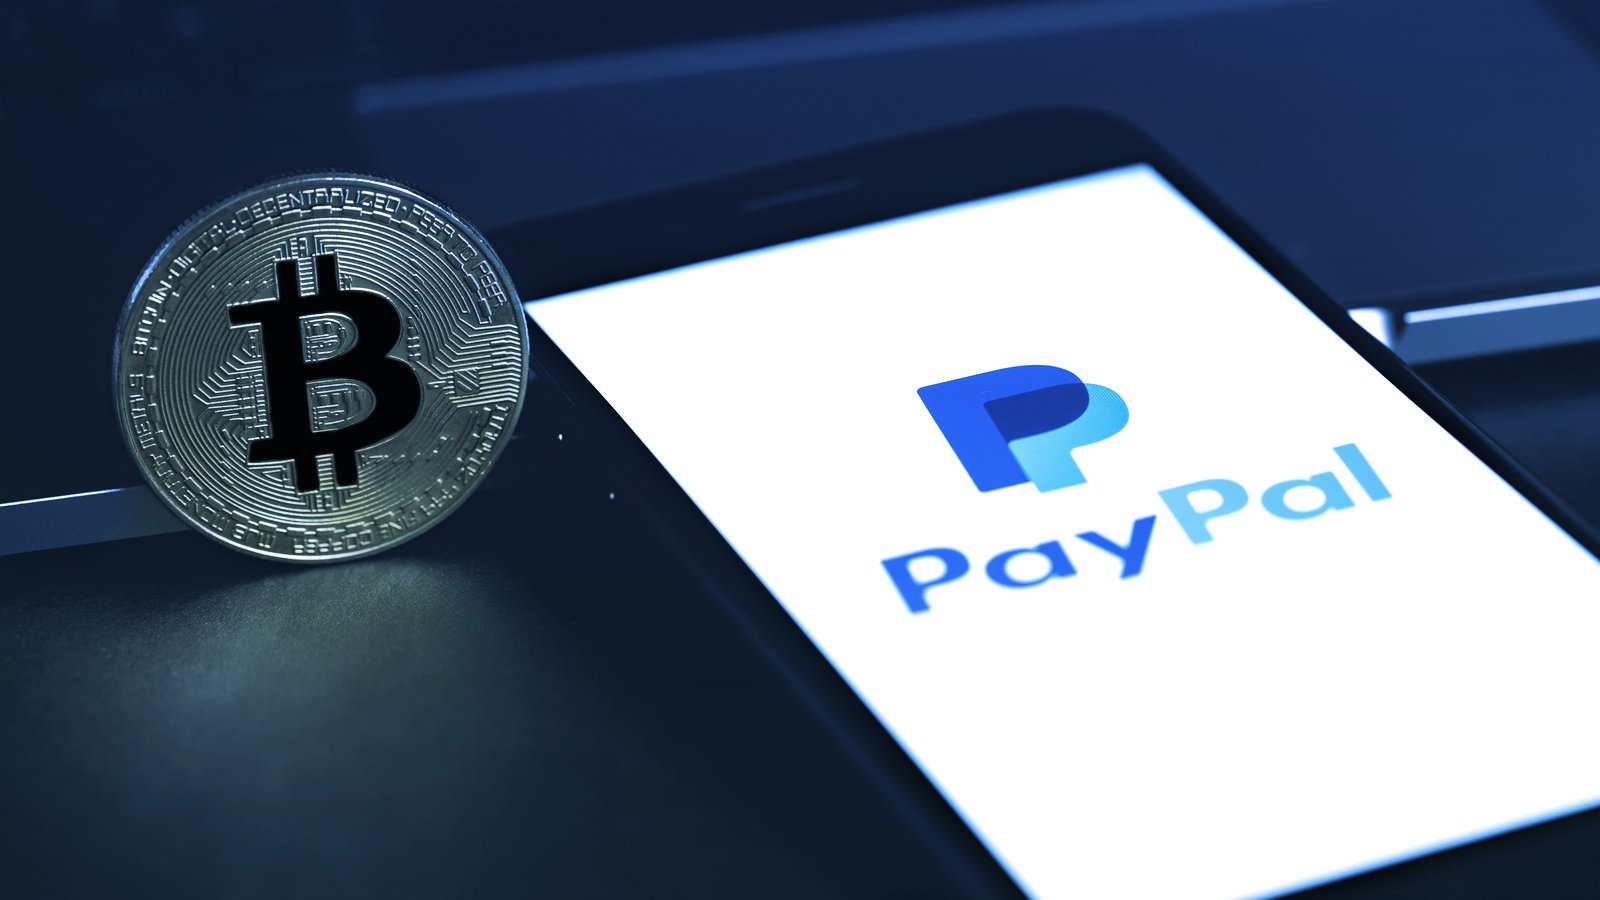 PayPal will let US users pay with Bitcoin, Ethereum, and Litecoin starting today - The Verge